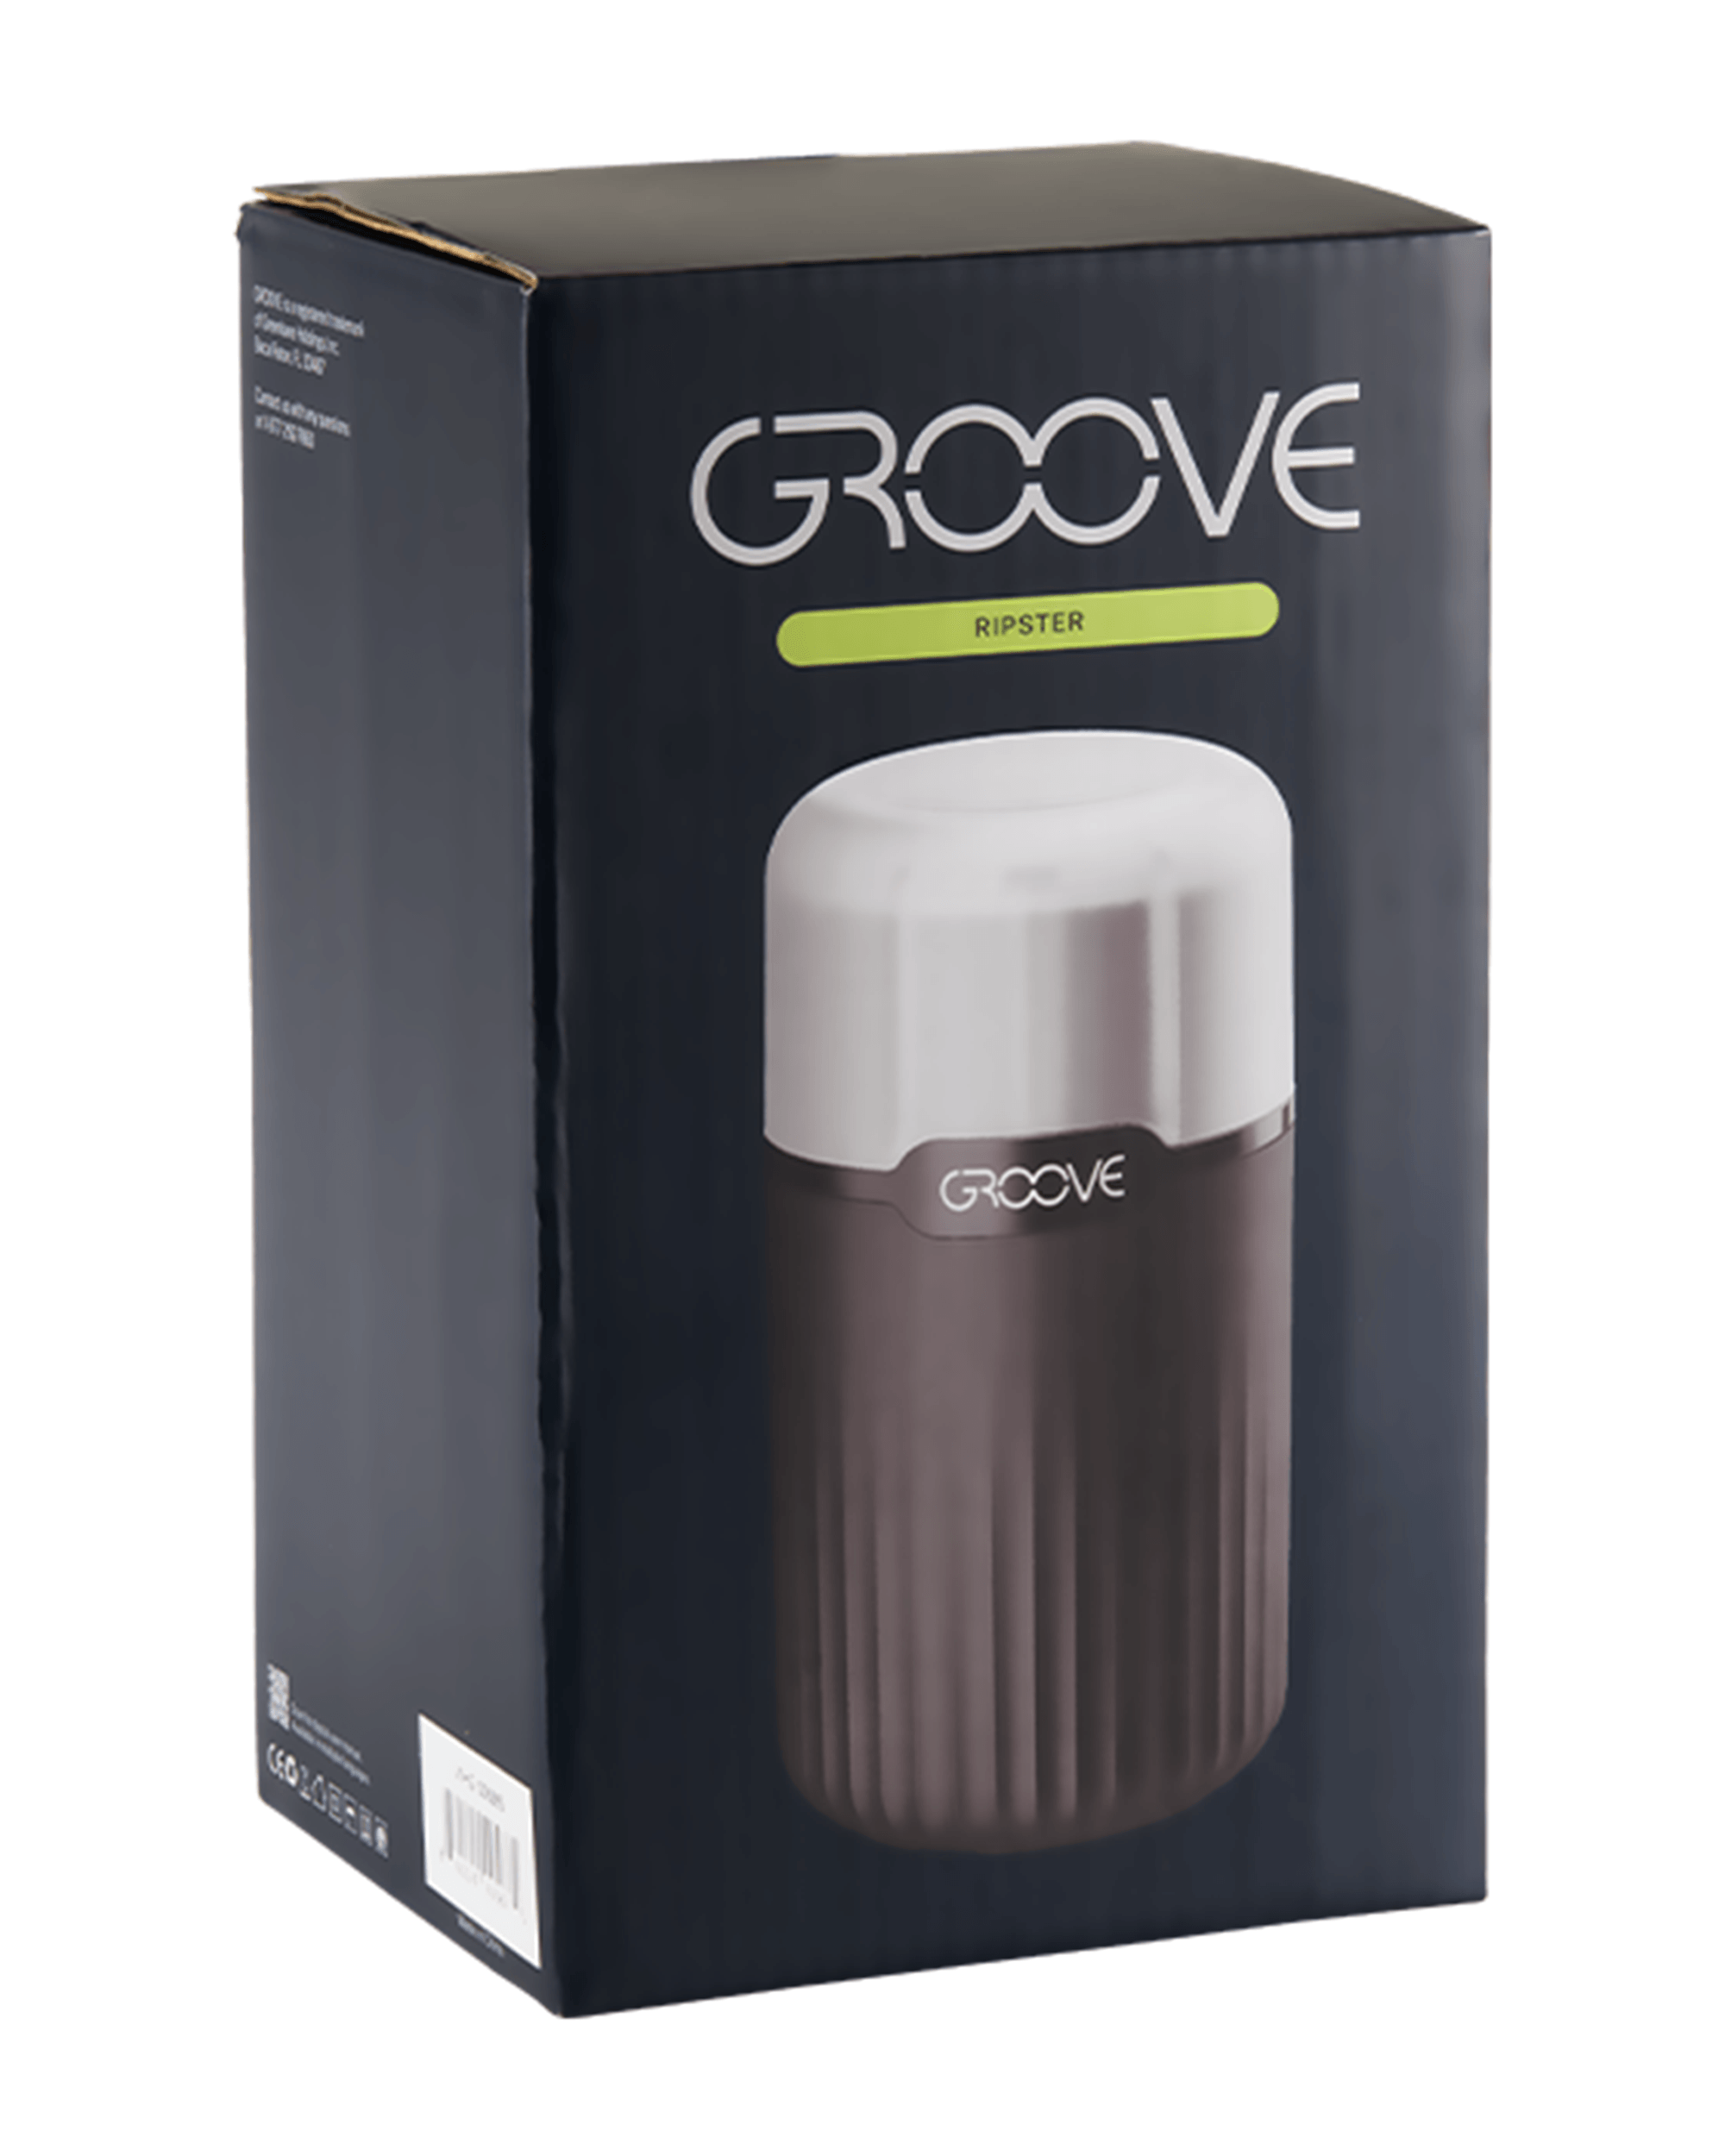 Groove Ripster, Grinder eléctrico GROOVE RIPSTER